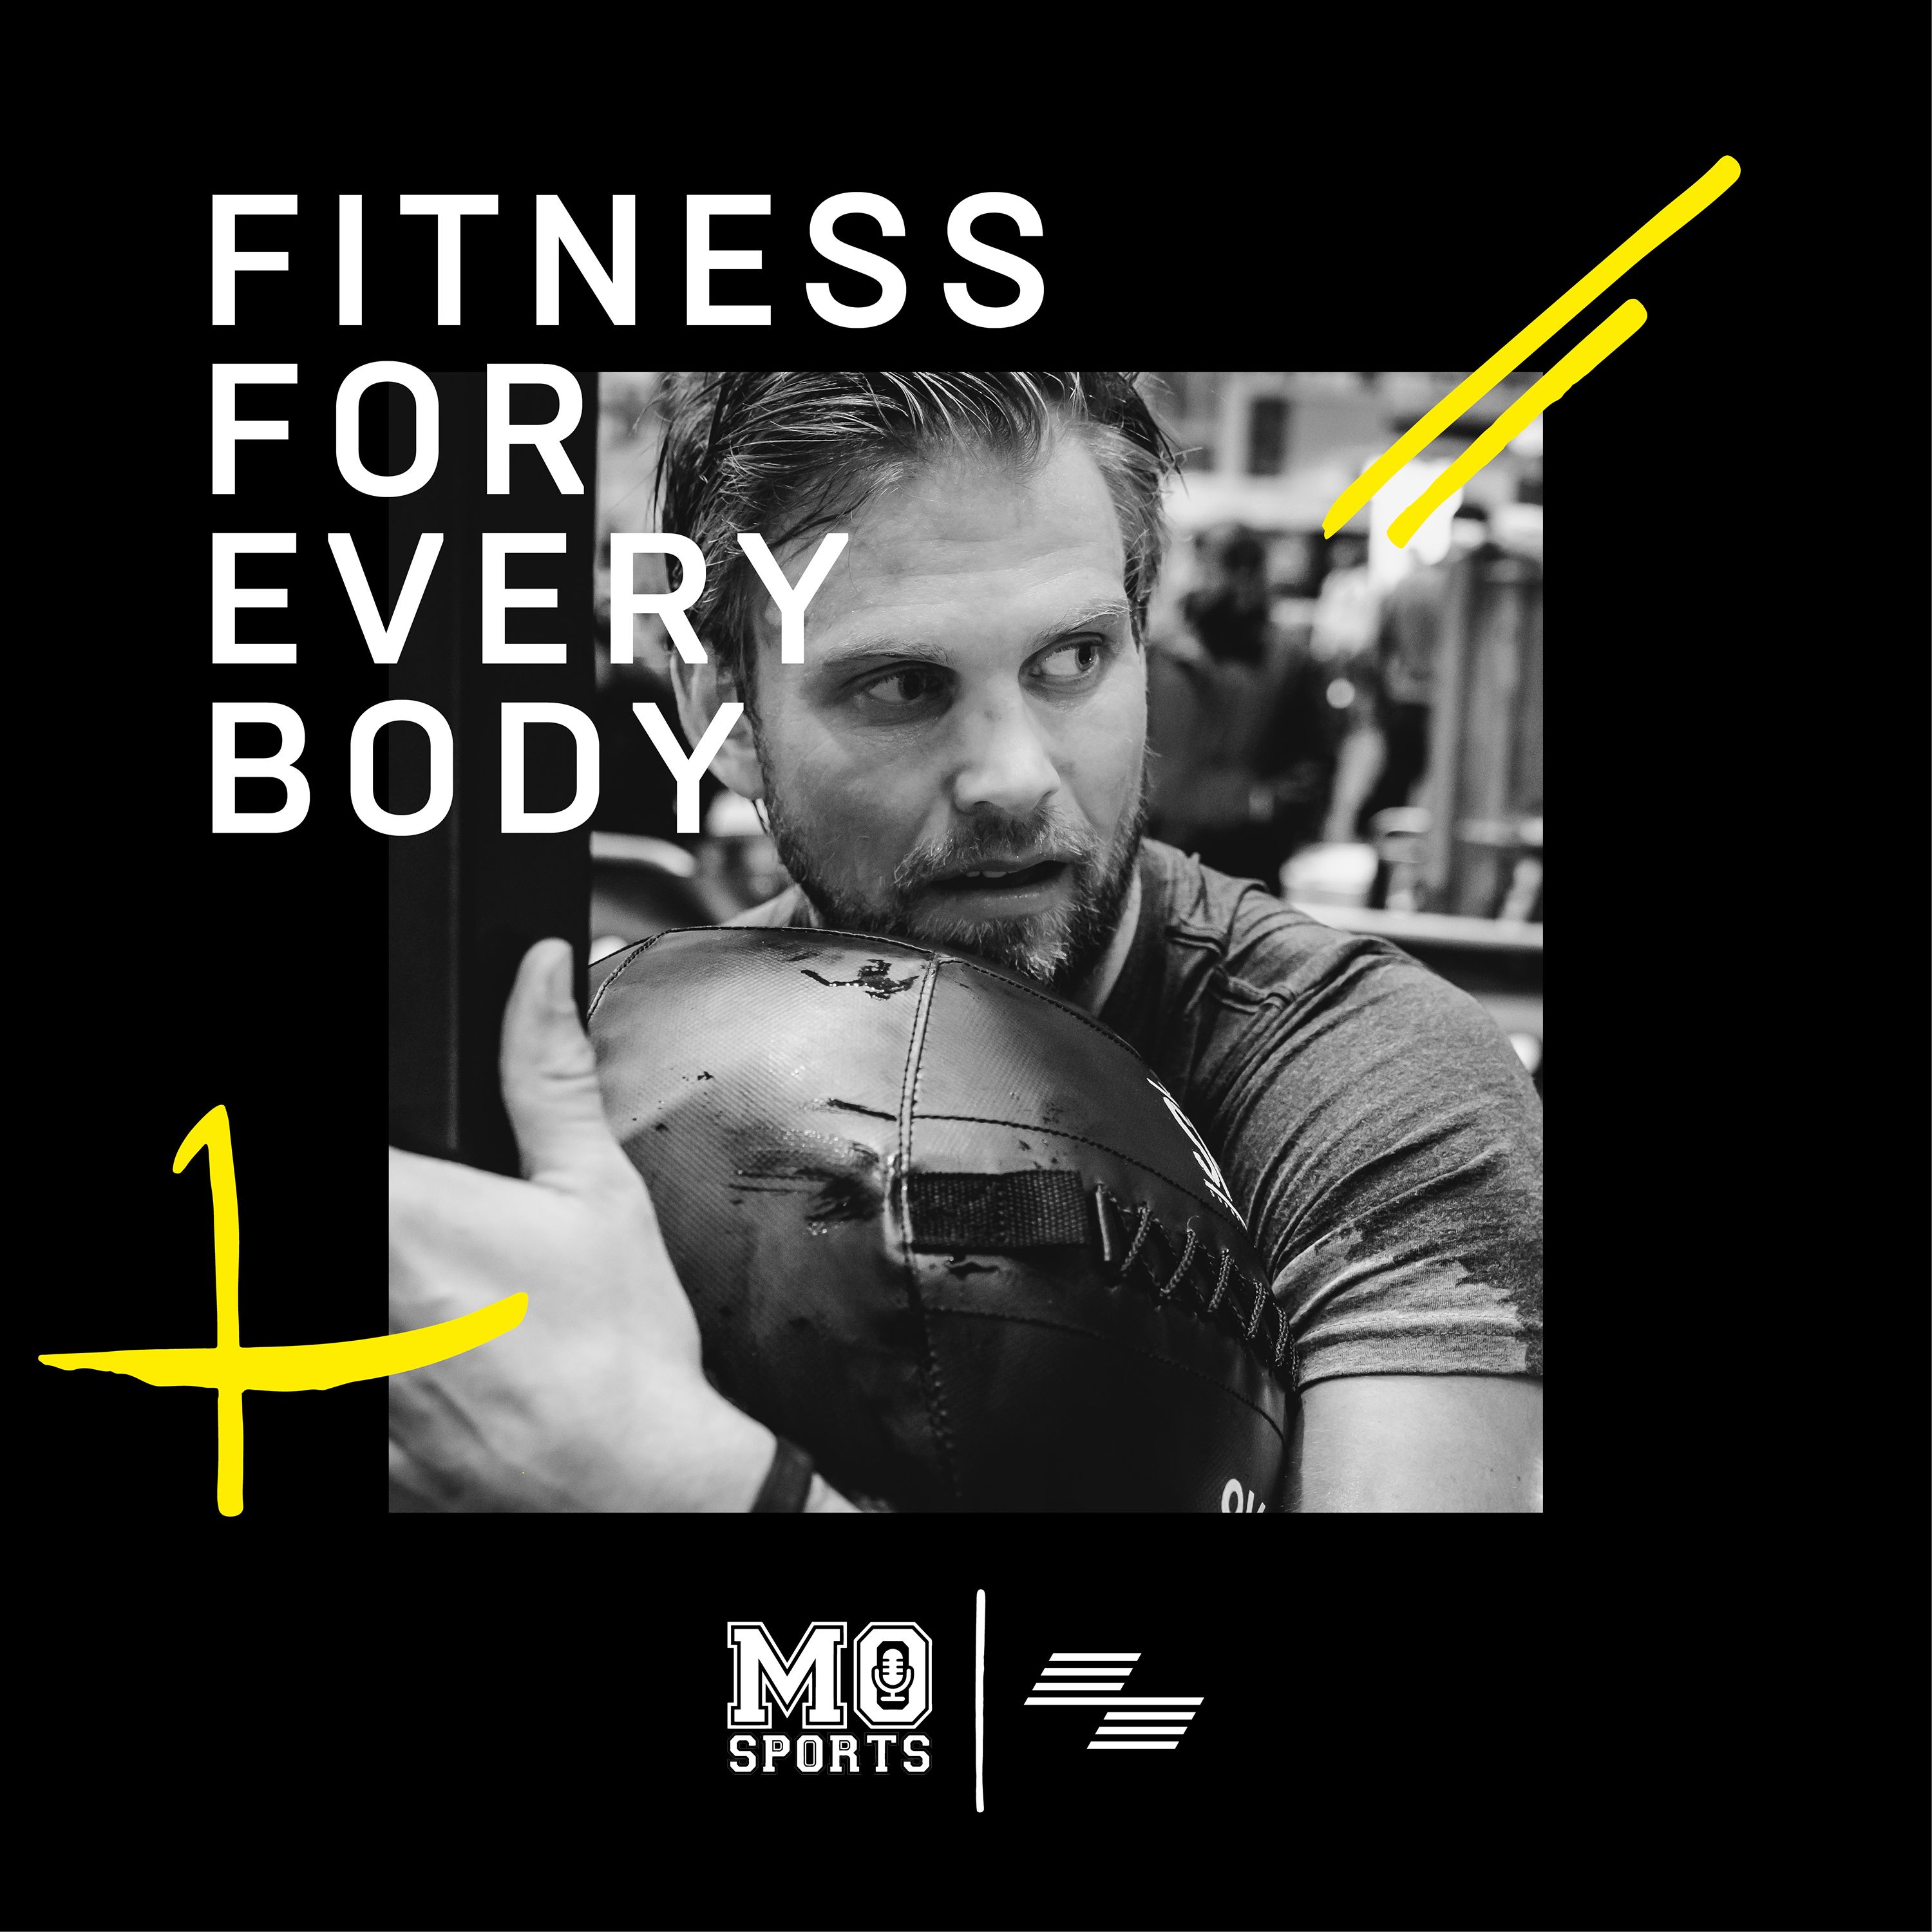 MoSports - Fitness for every body